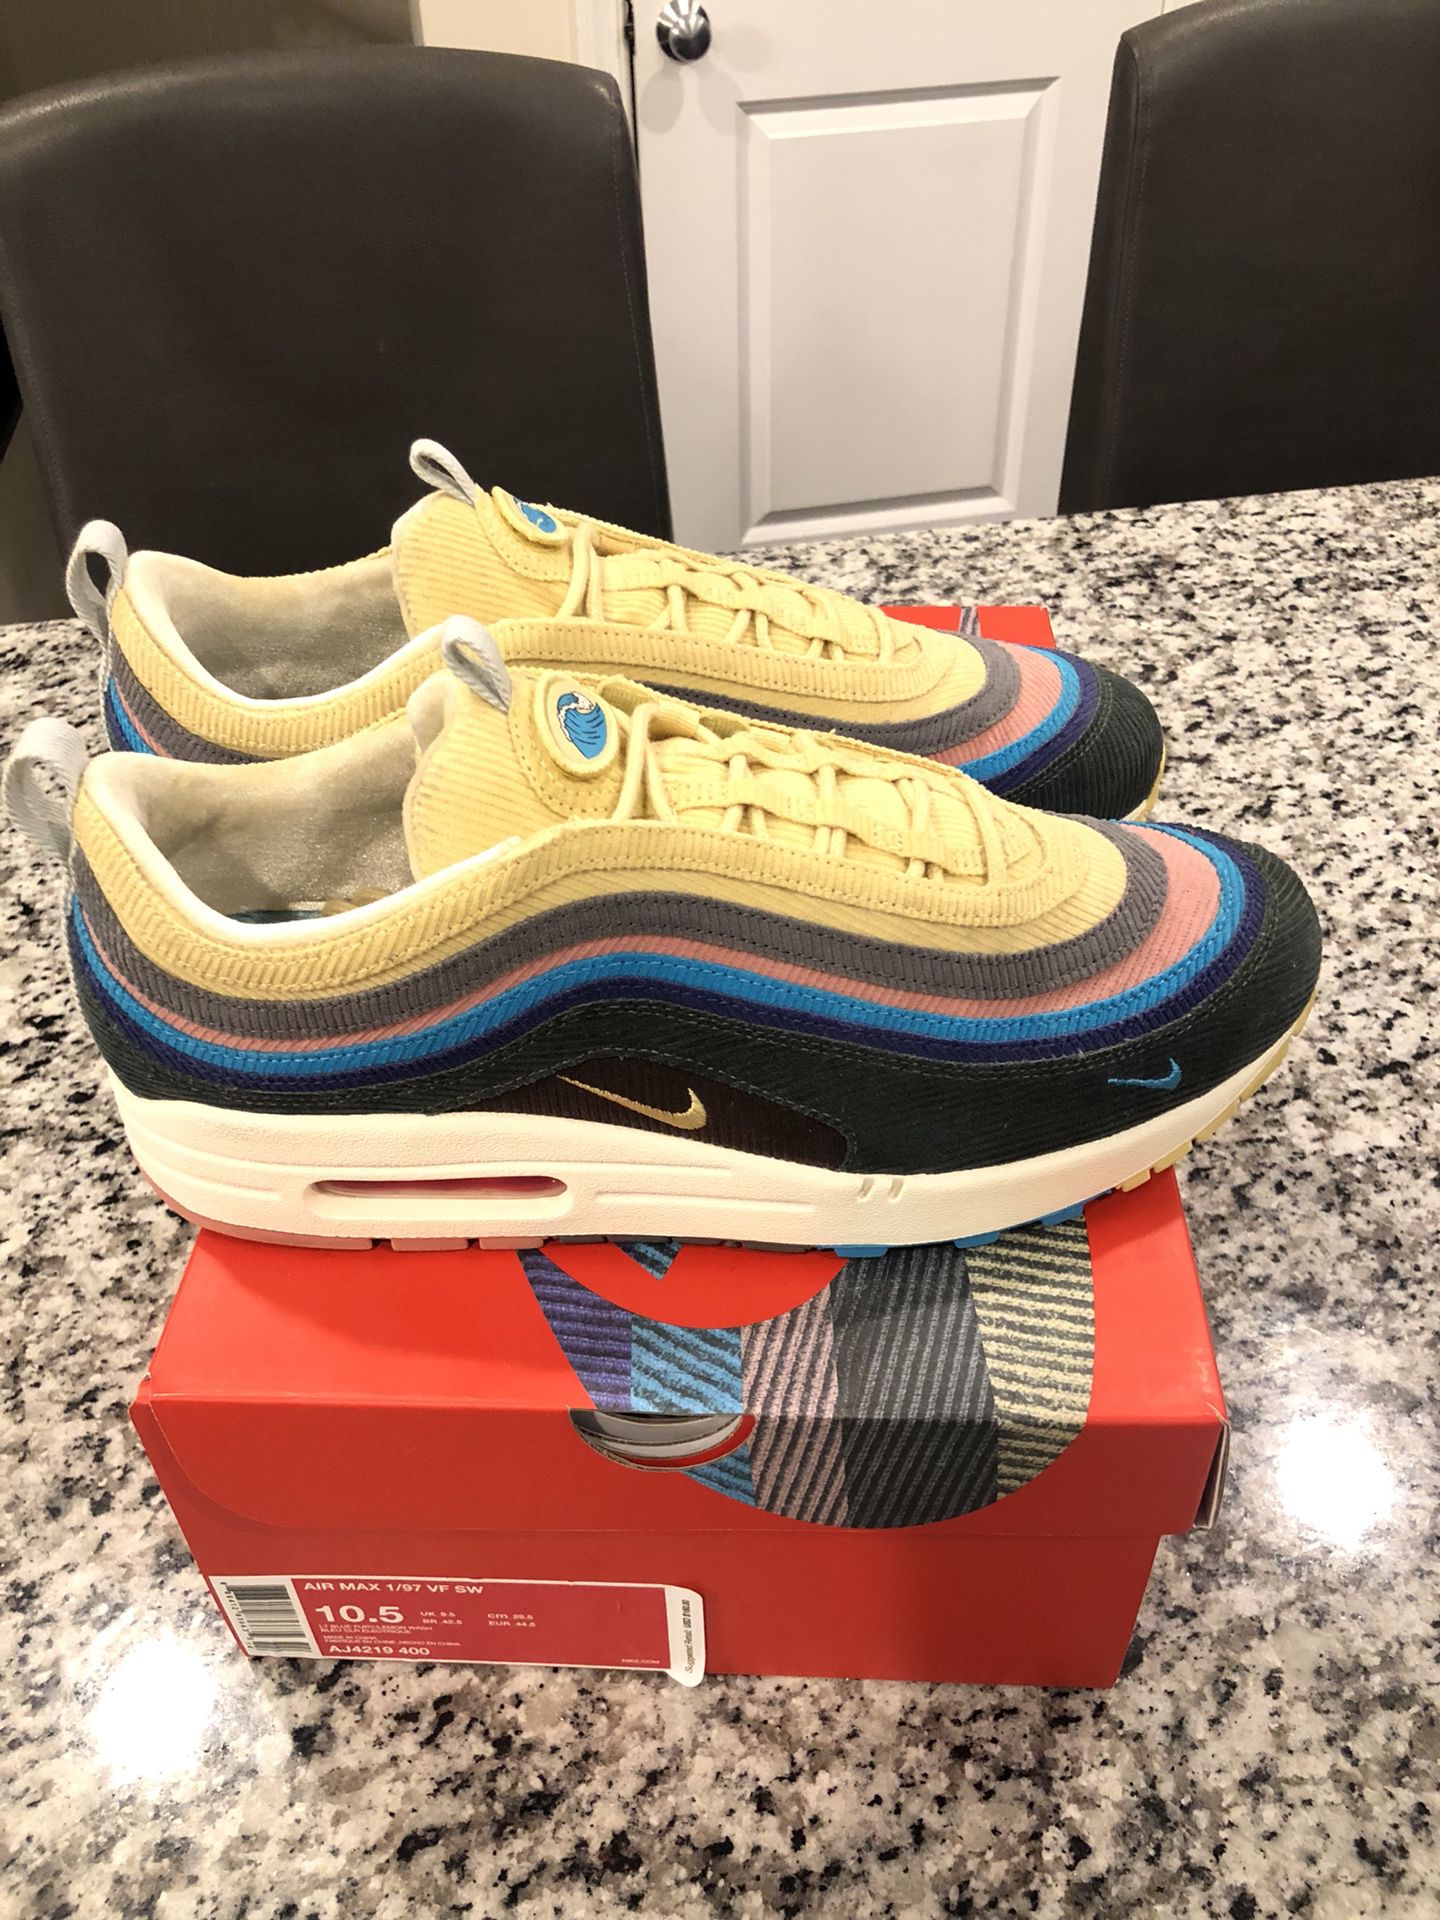 Sean Wotherspoon 97/1 size 10.5